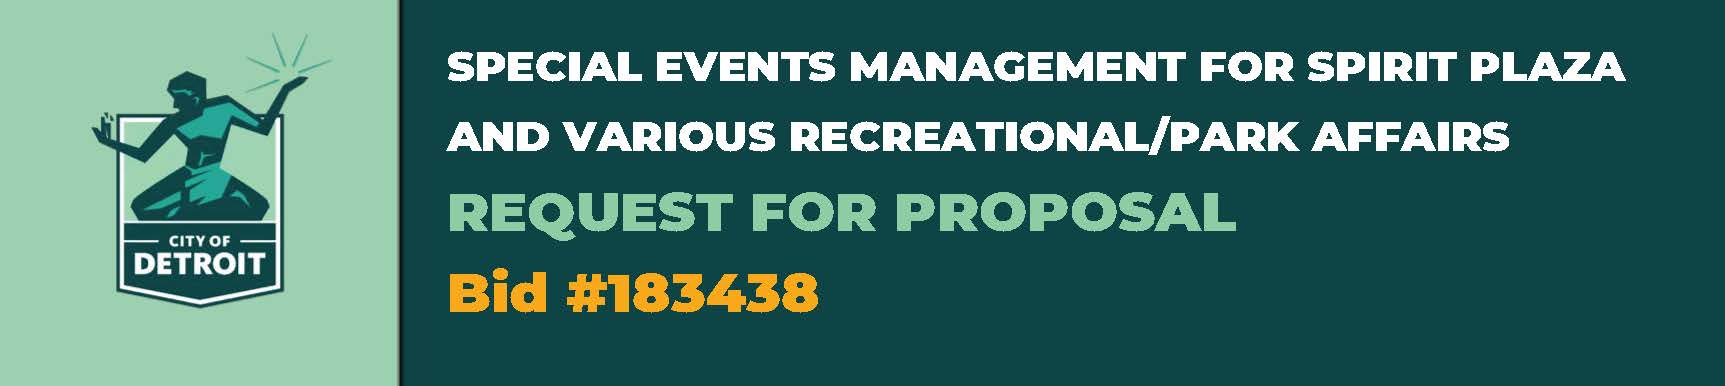 SPECIAL EVENTS MANAGEMENT FOR SPIRIT PLAZA AND VARIOUS RECREATIONAL/PARK AFFAIRS